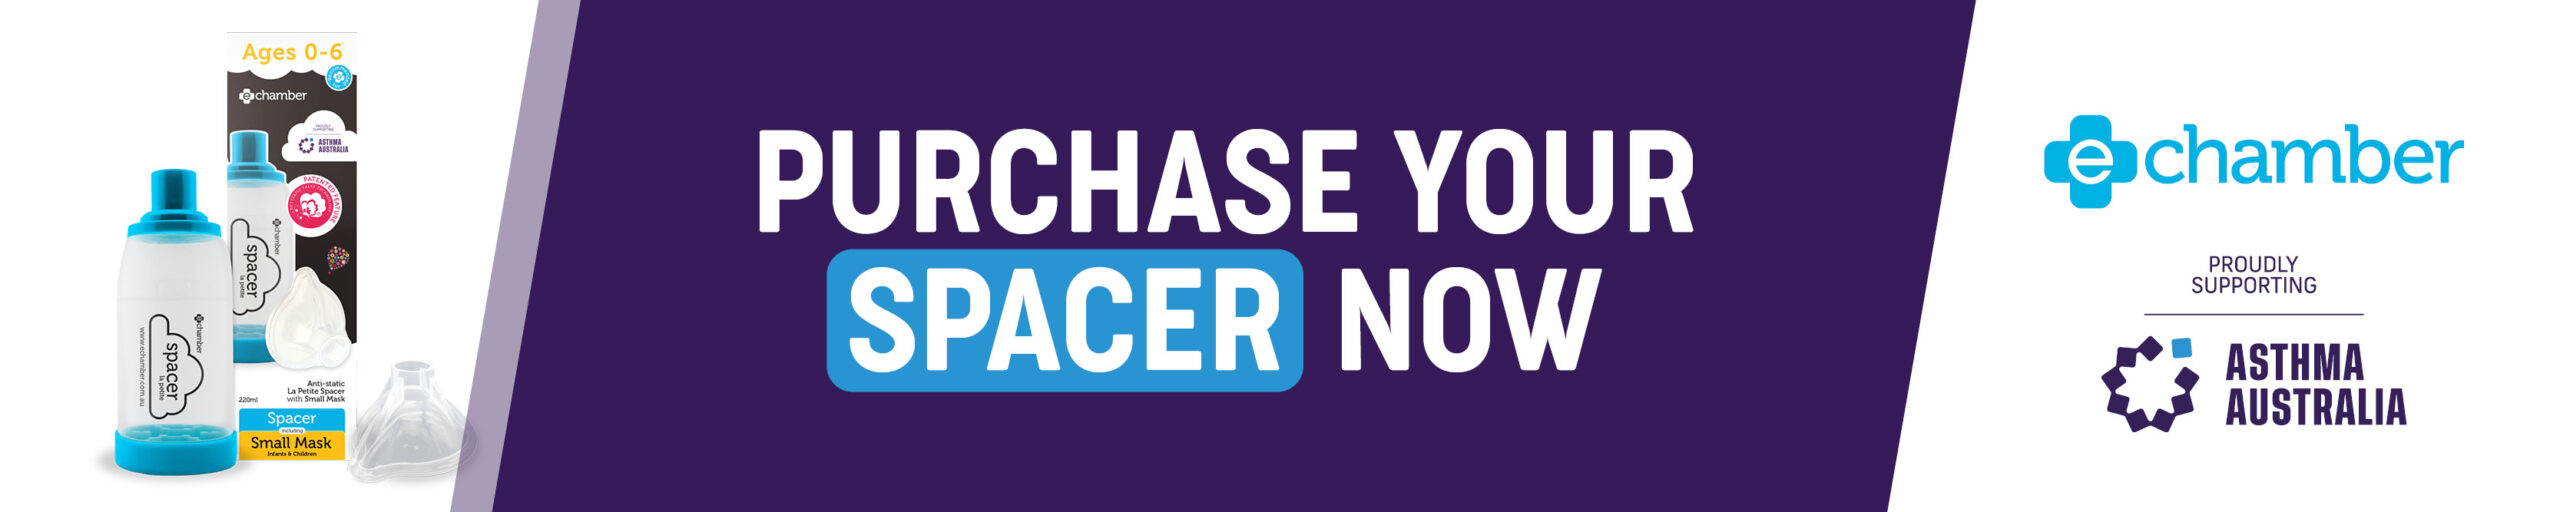 Purchase your spacer now, Asthma Australia, echamber